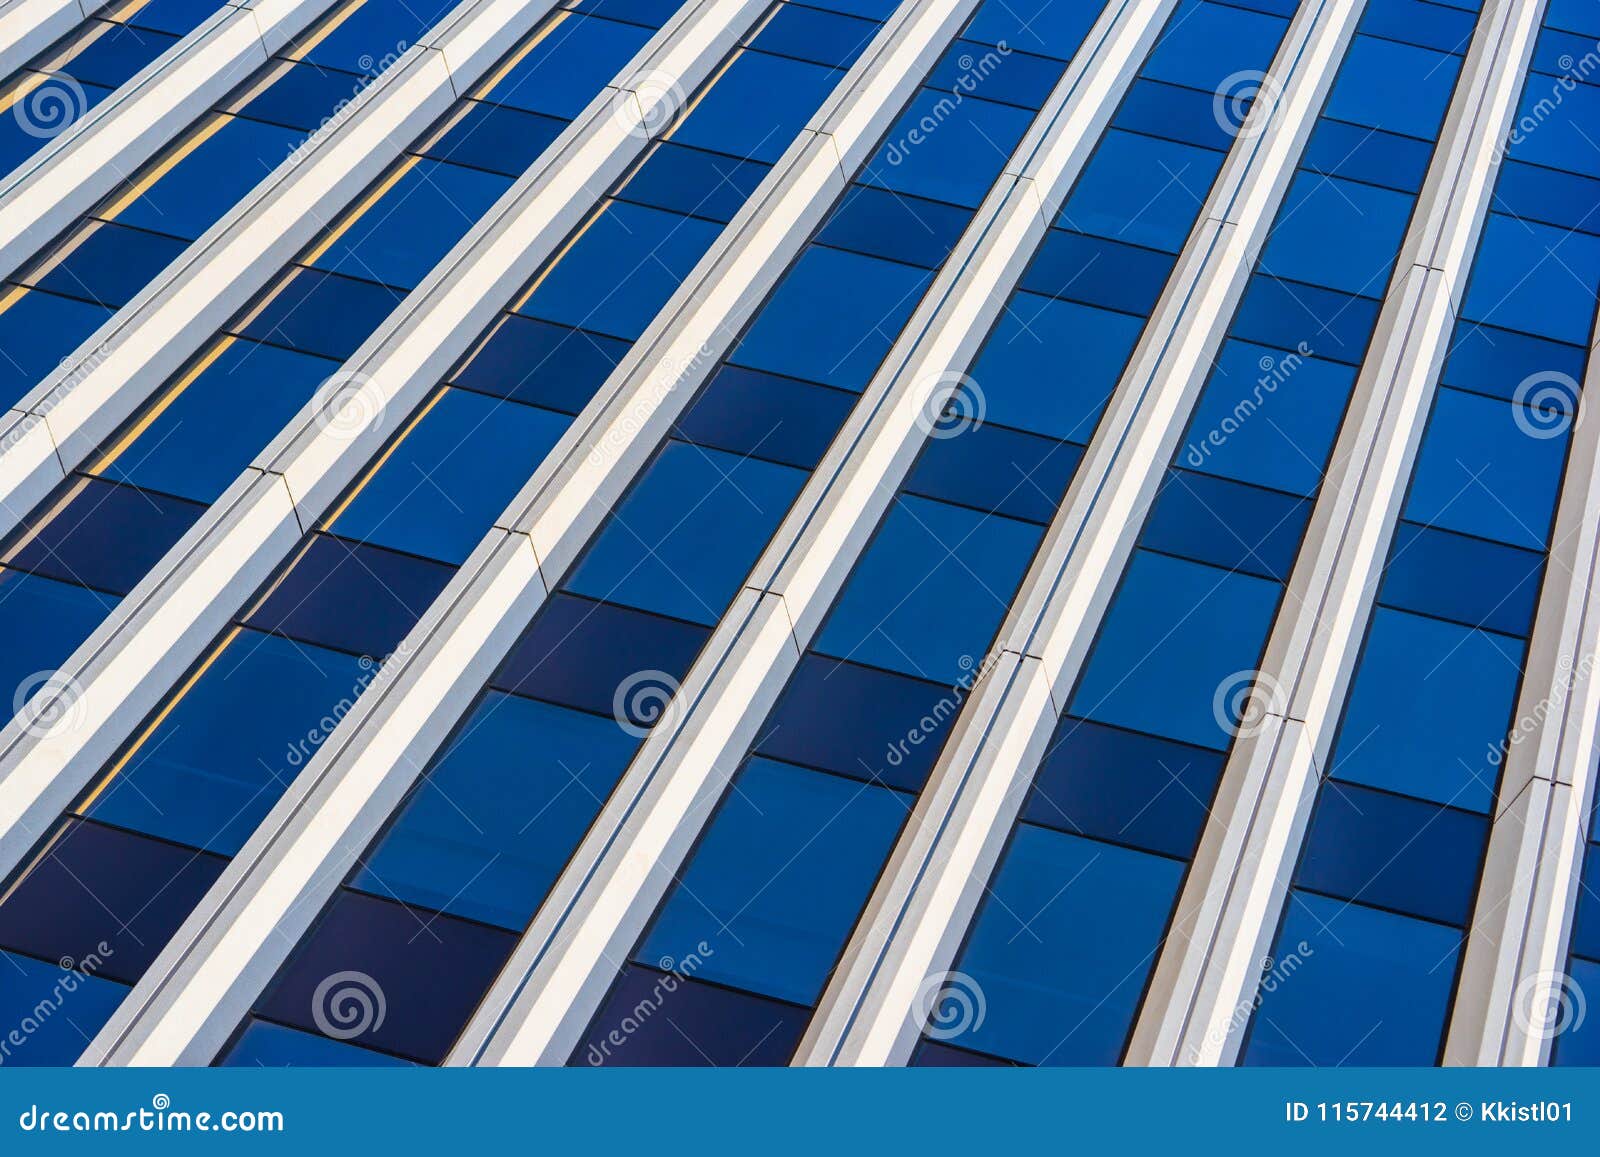 Glass and Metal Ribs of Skyscraper Stock Photo - Image of detail ...